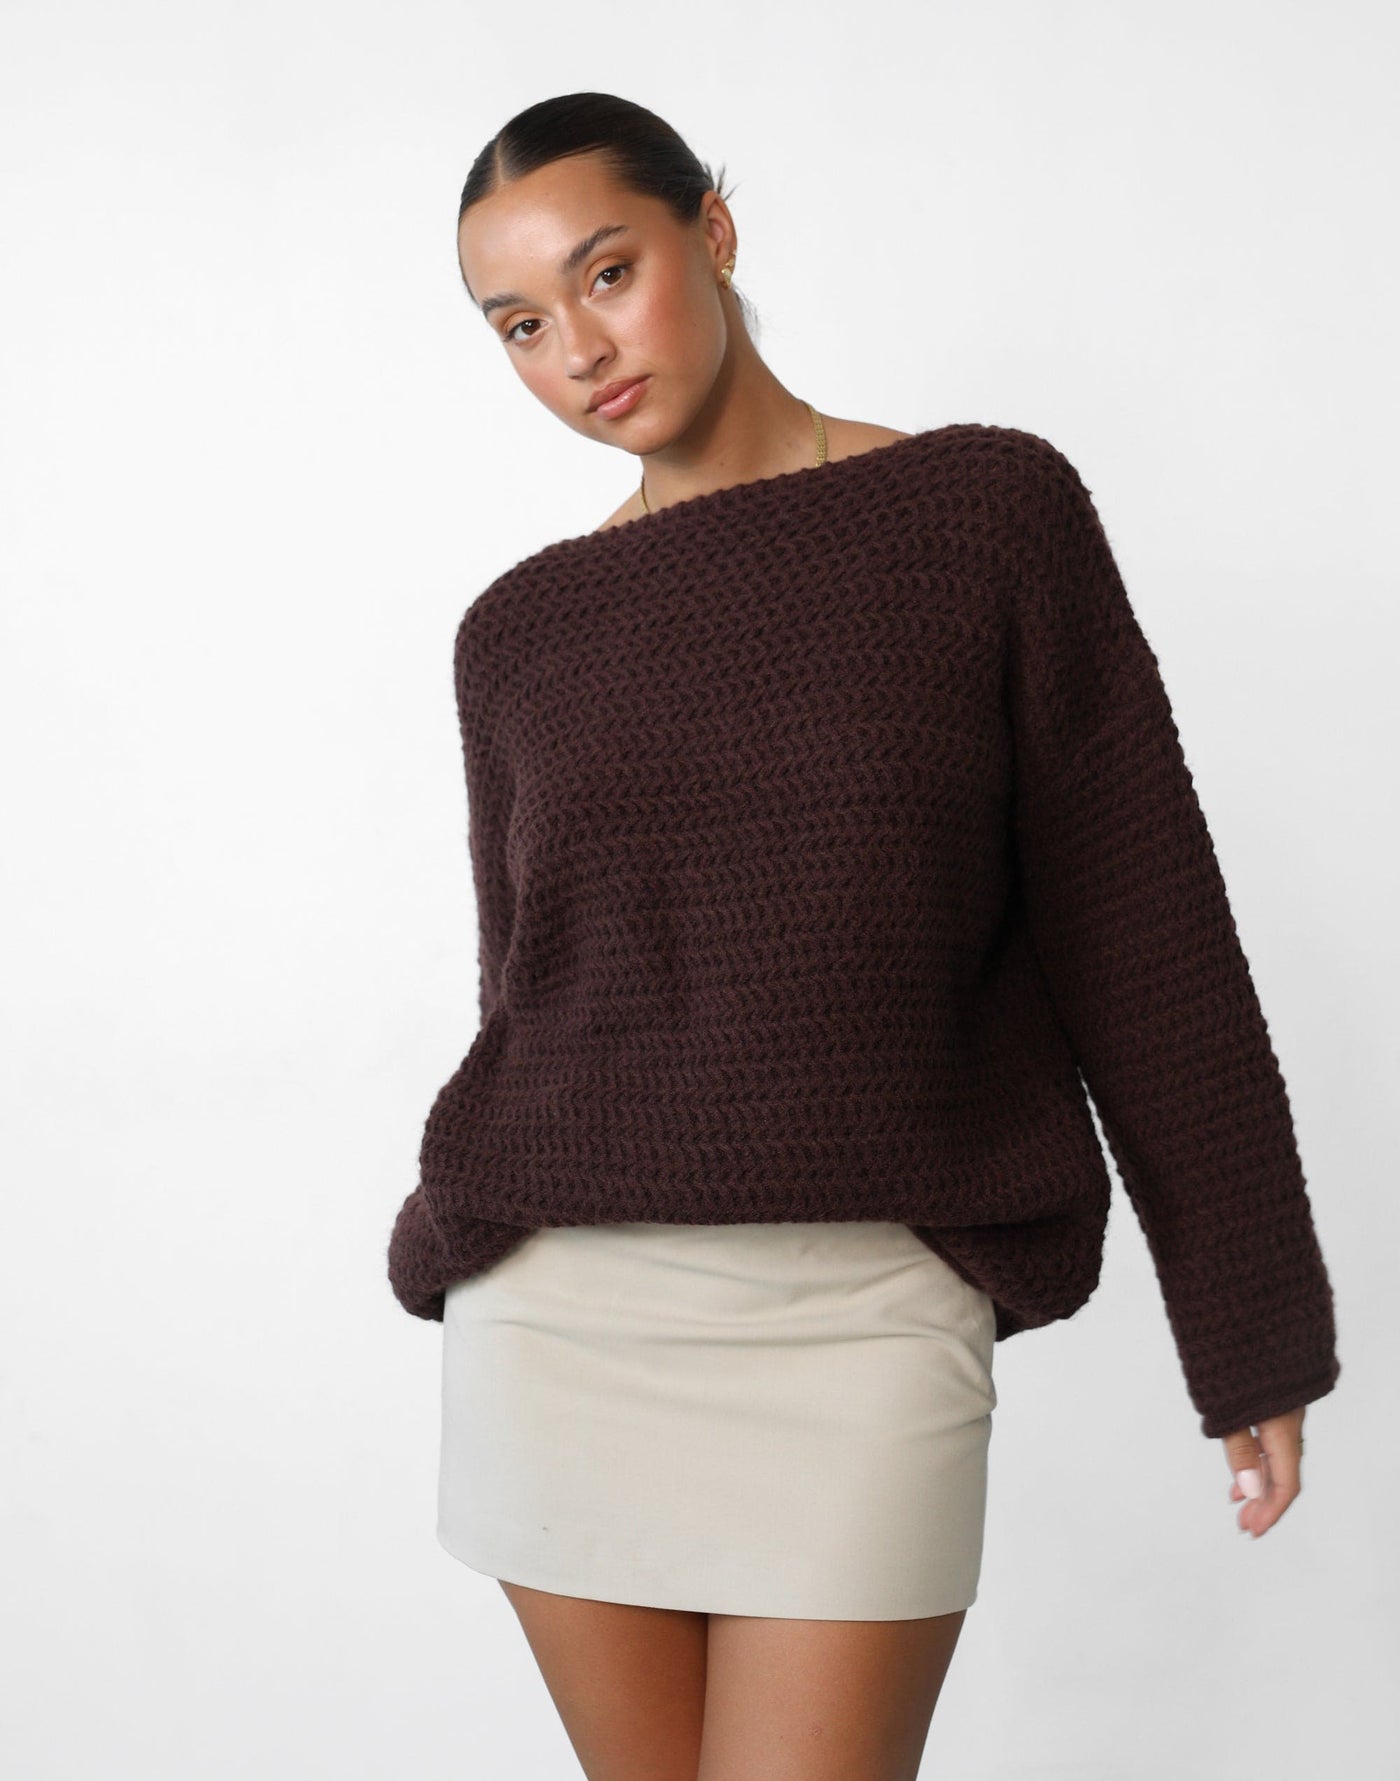 Everton Sweater (Chocolate) - Chunky Knit Oversized Sweater - Women's Top - Charcoal Clothing